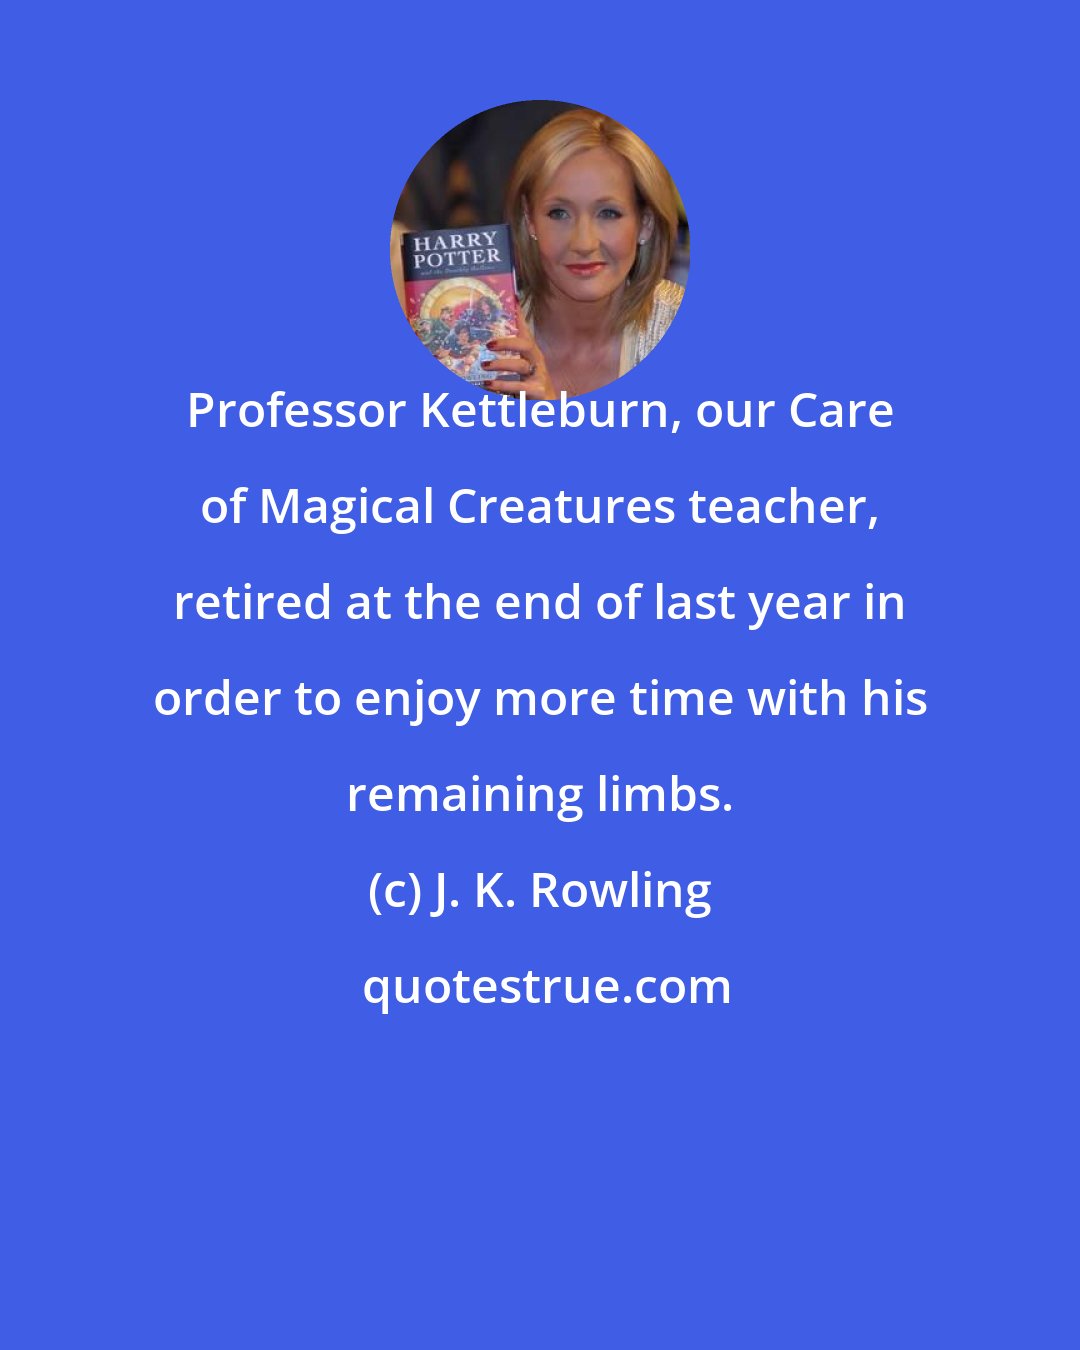 J. K. Rowling: Professor Kettleburn, our Care of Magical Creatures teacher, retired at the end of last year in order to enjoy more time with his remaining limbs.